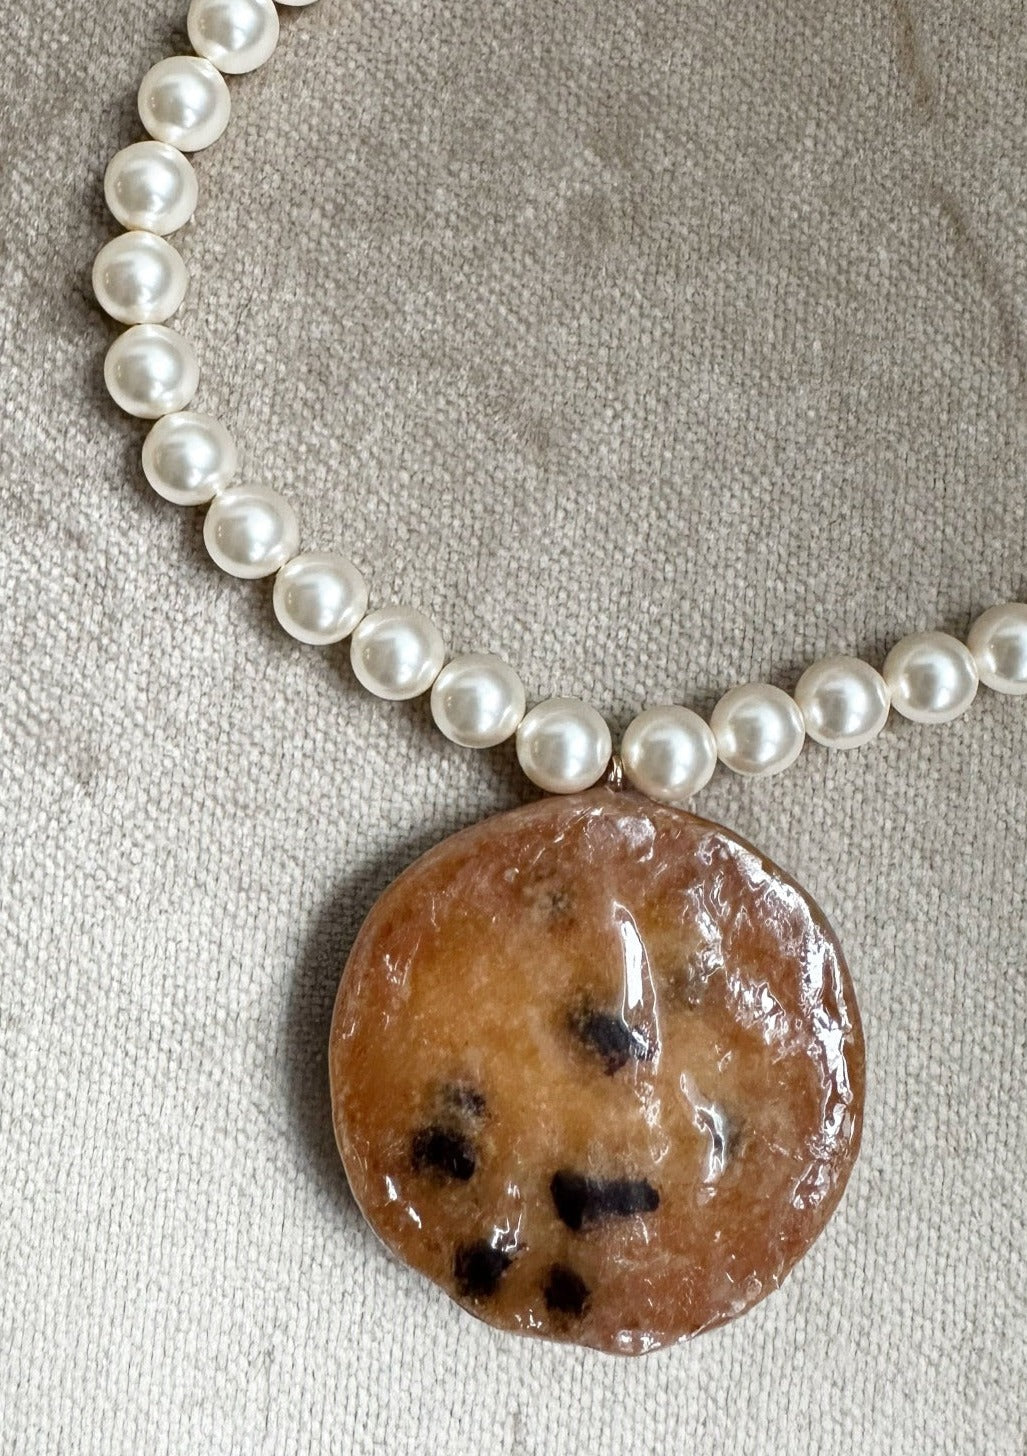 Resin coated cookie on beaded pearl necklace with gold clasp.